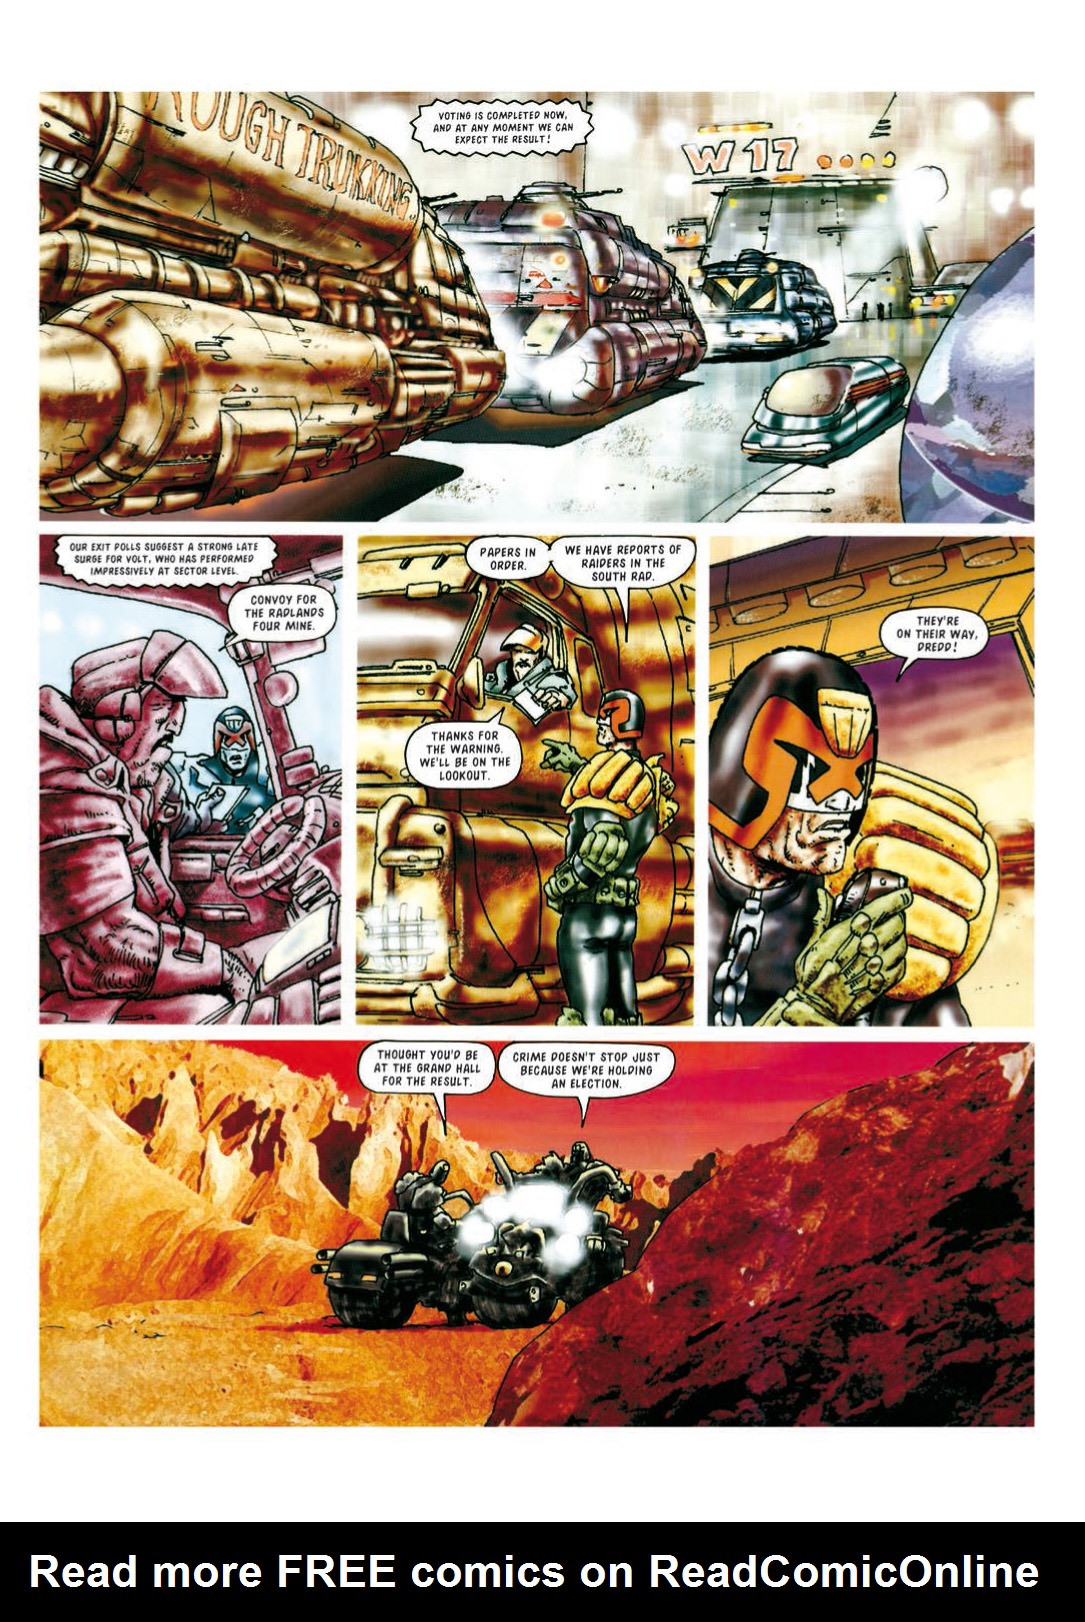 Read online Judge Dredd: The Complete Case Files comic -  Issue # TPB 22 - 21